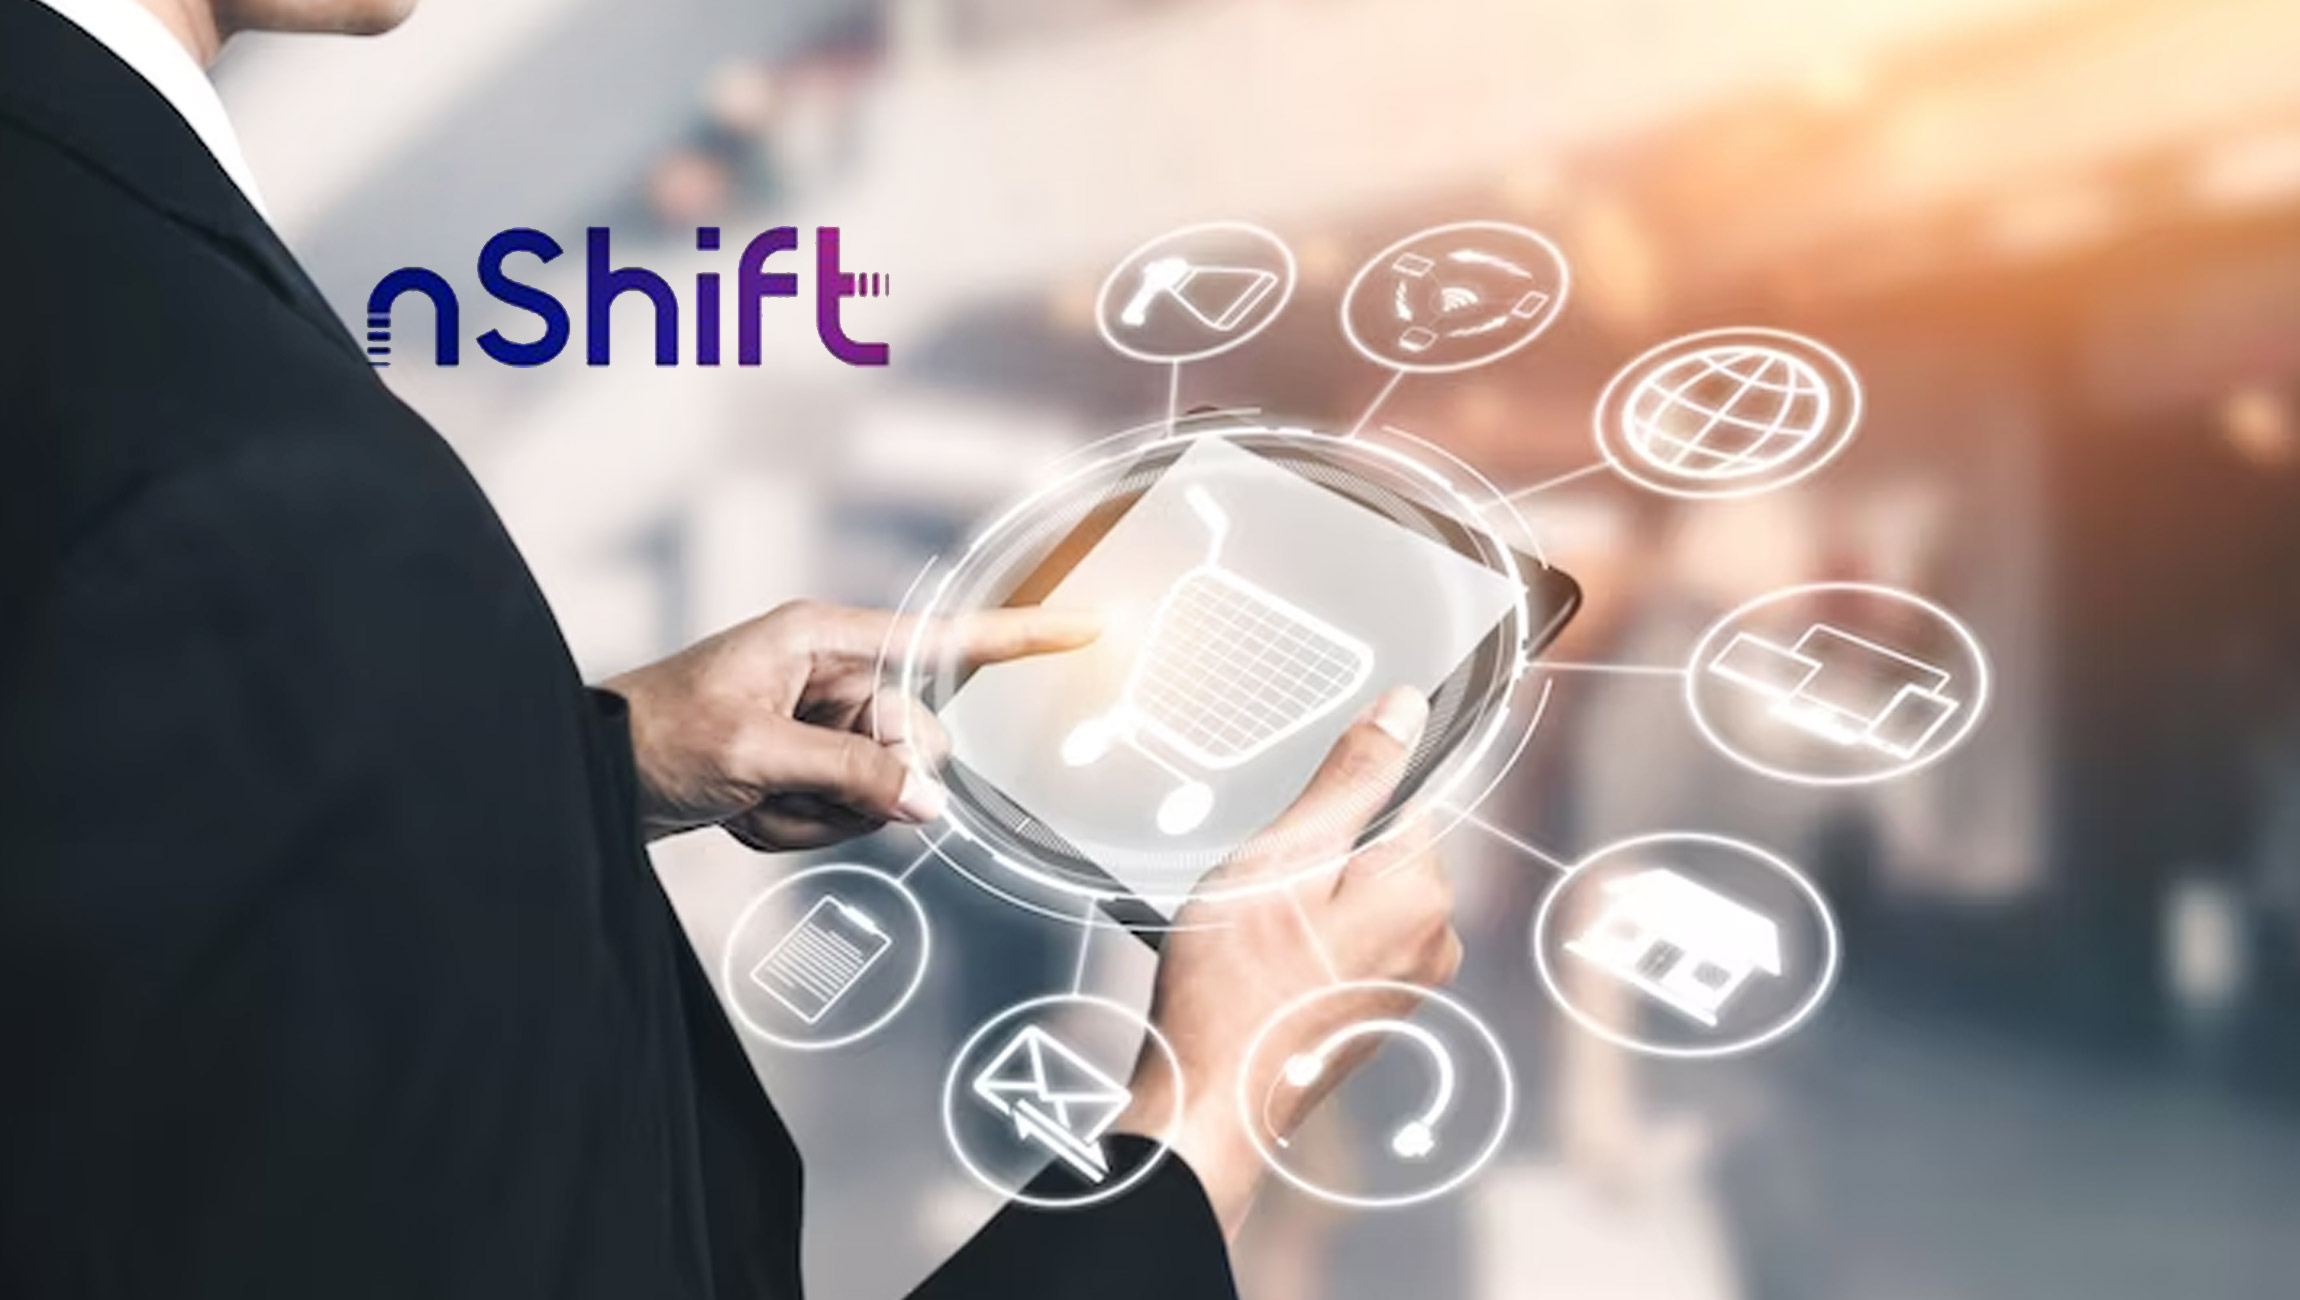 nShift: 58% Of Consumers Cut Spend on Non-essential Items